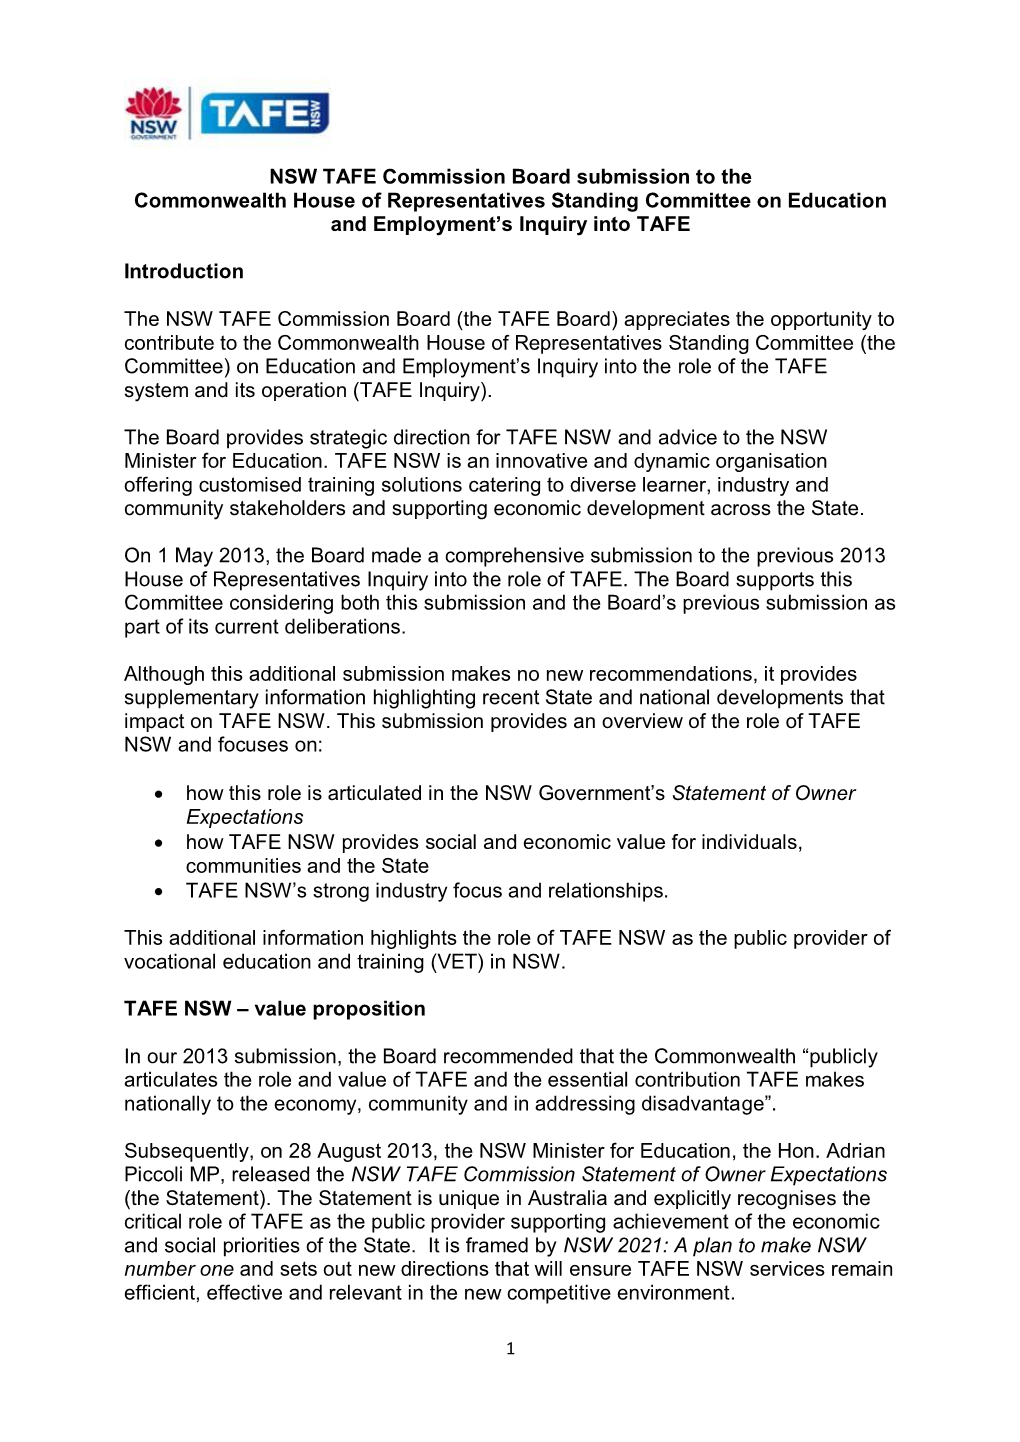 NSW TAFE Commission Board Submission to the Commonwealth House of Representatives Standing Committee on Education and Employment’S Inquiry Into TAFE